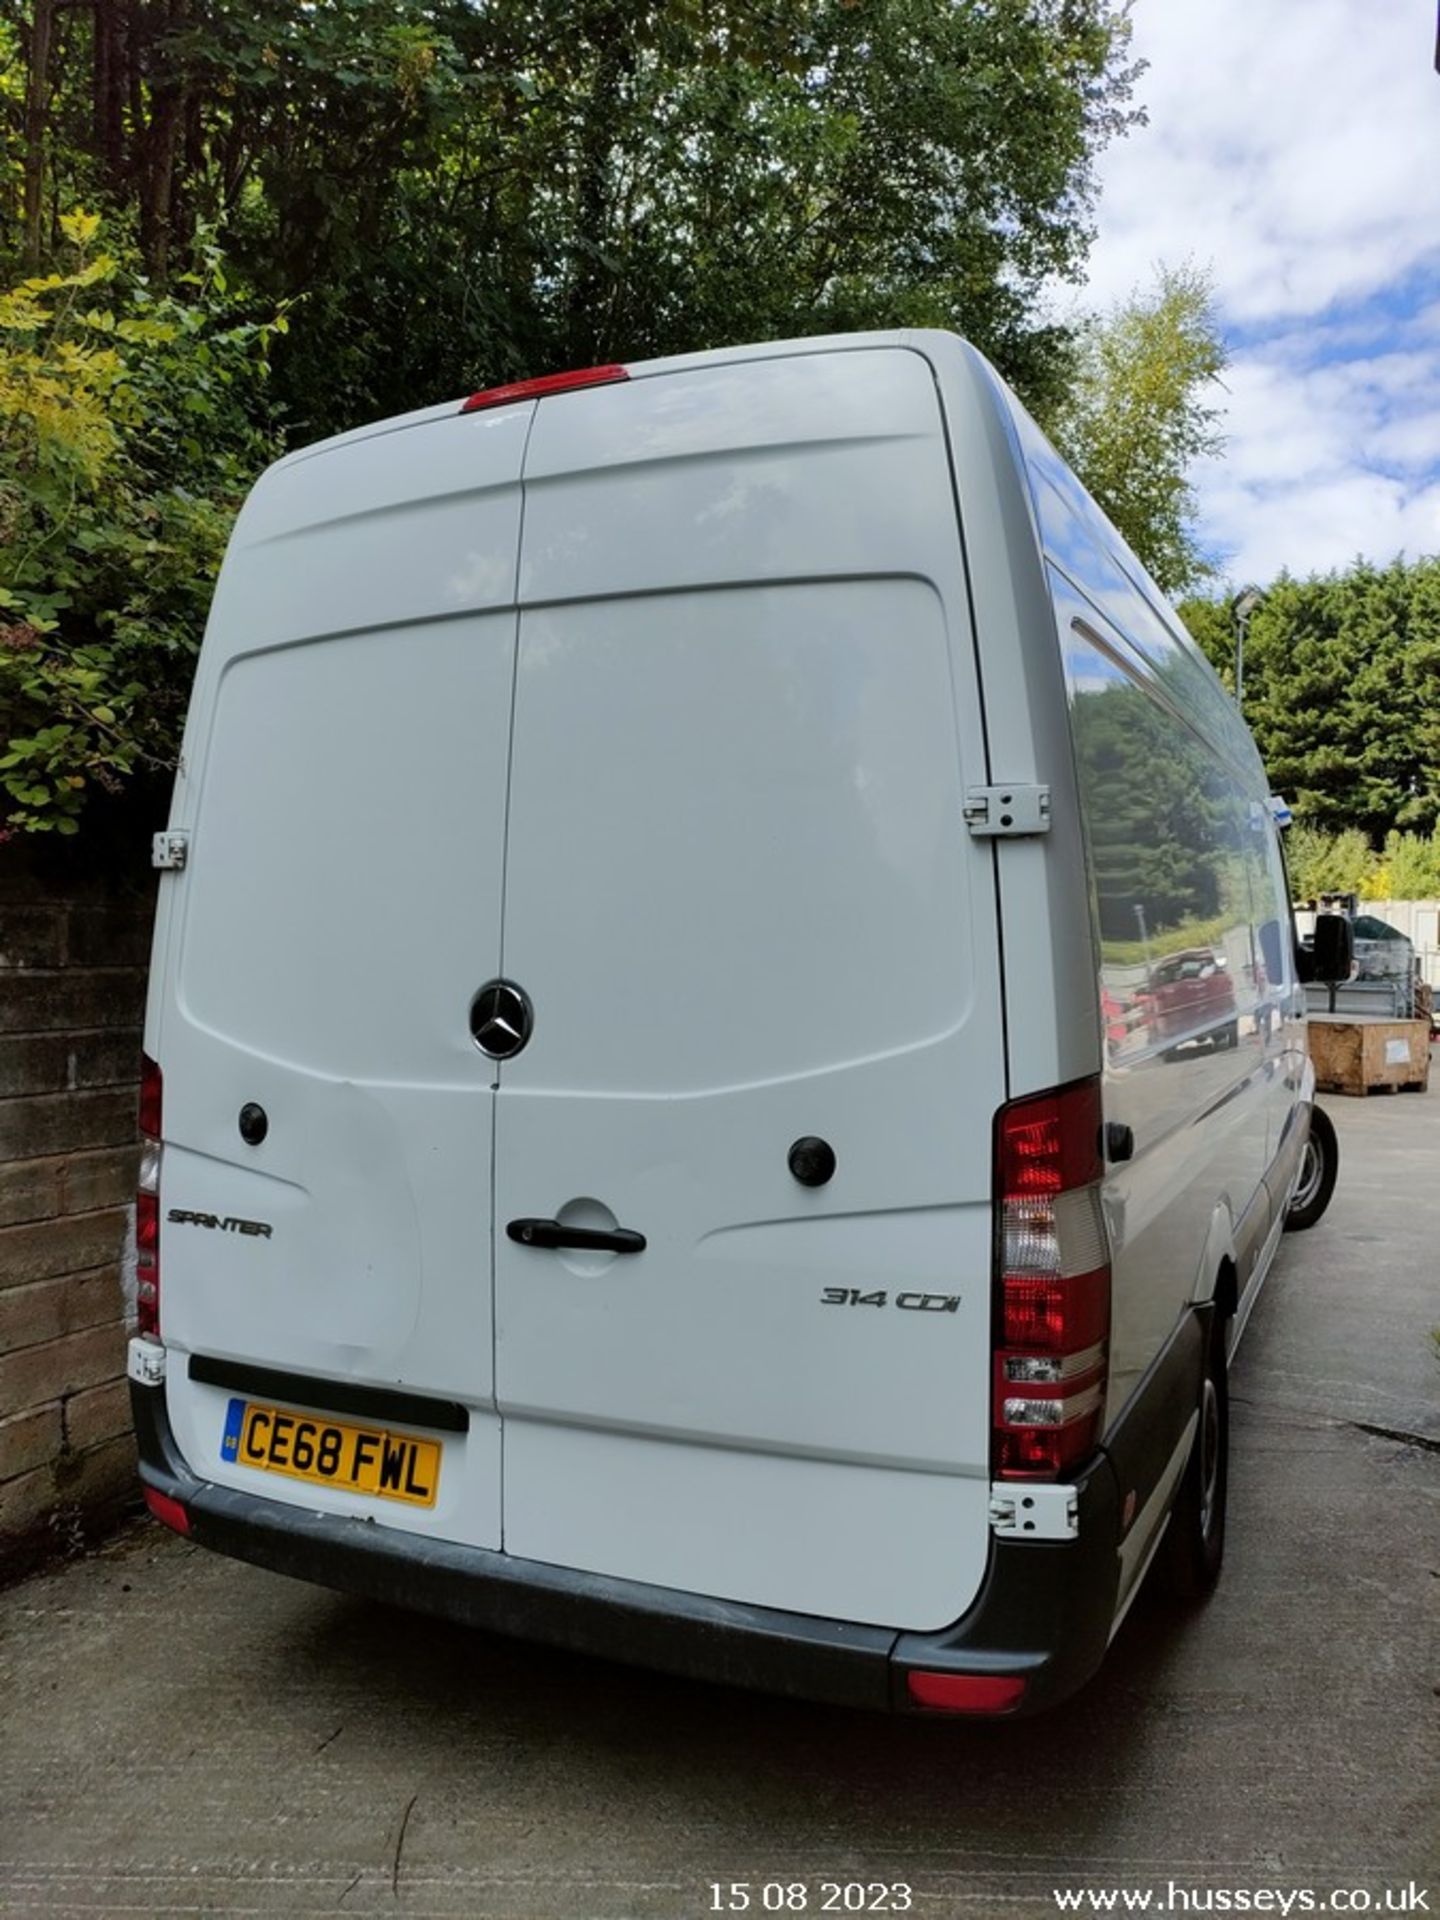 18/68 MERCEDES-BENZ SPRINTER 314CDI - 2143cc 5dr Refrigerated (White) - Image 25 of 40